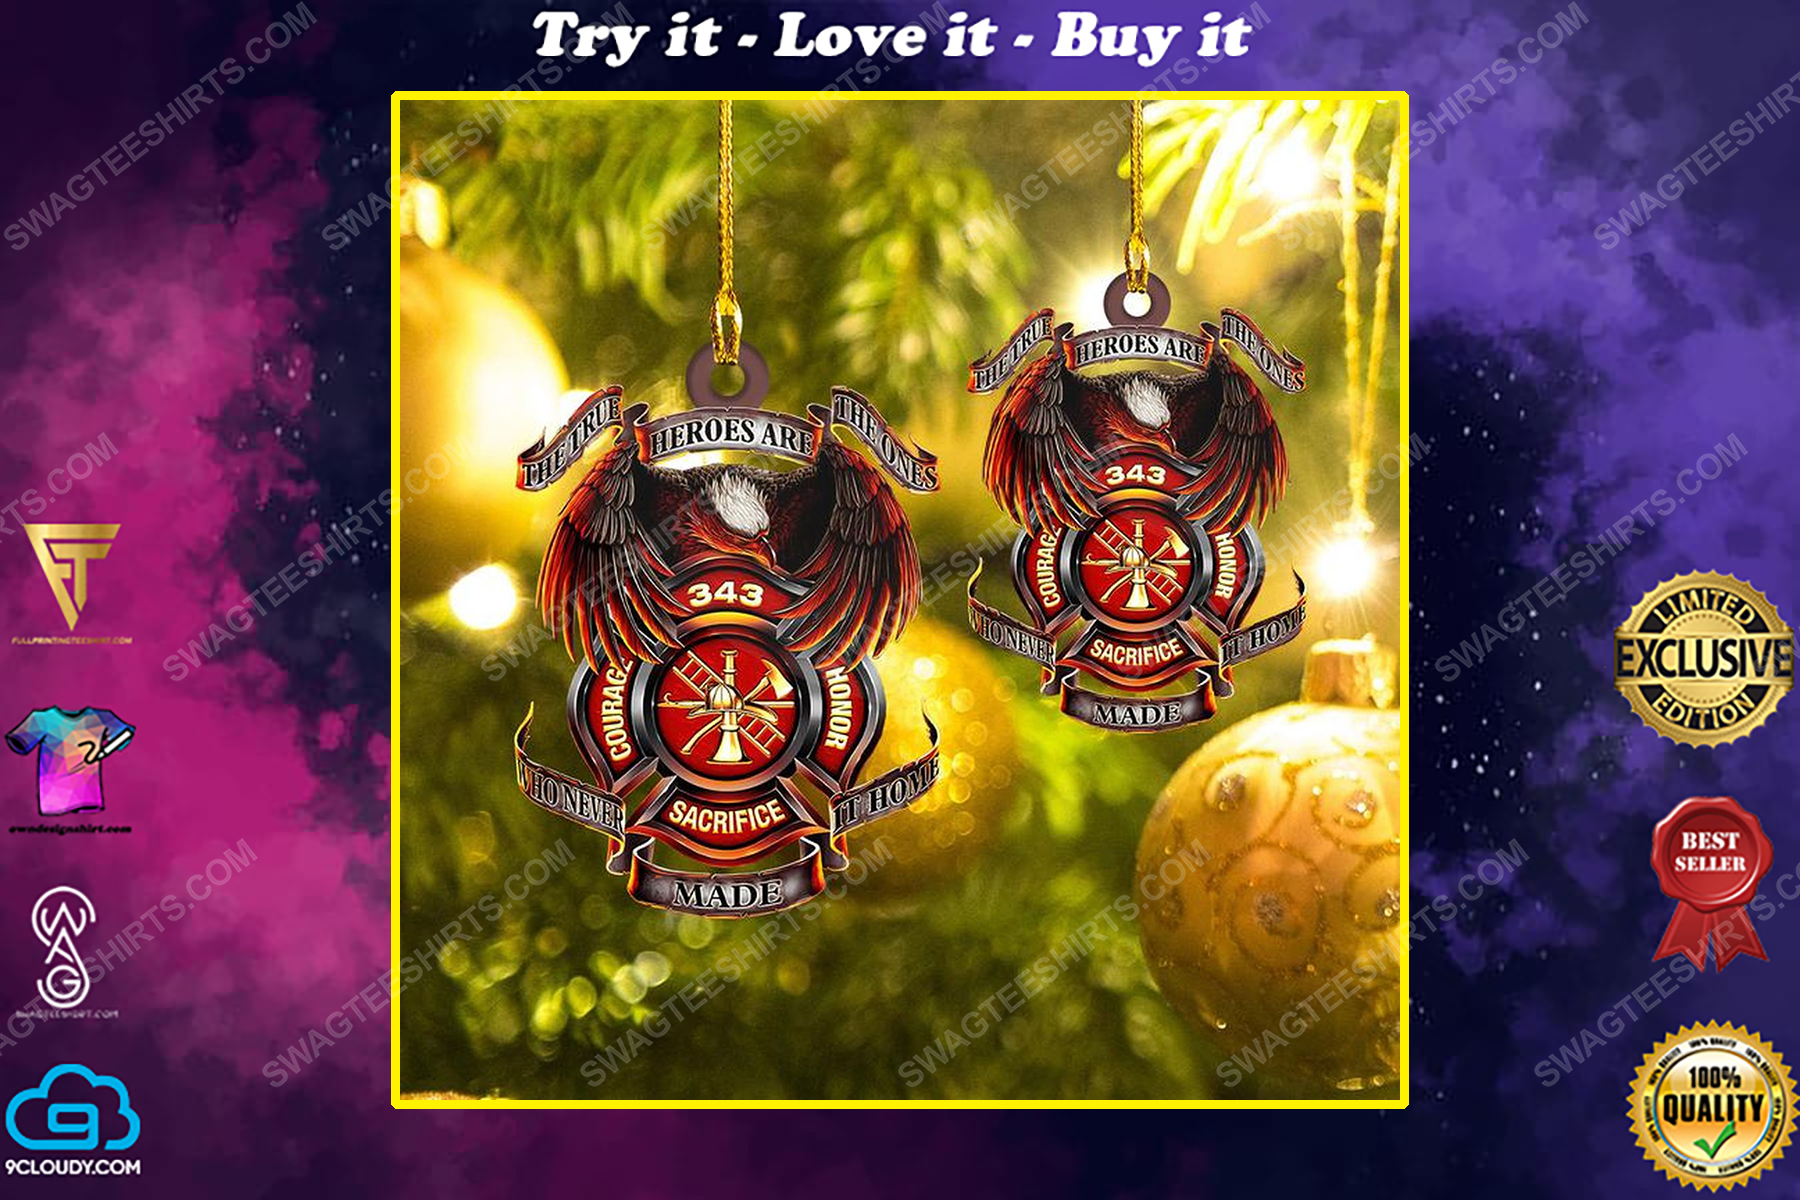 The true hero is ones firefighter christmas gift ornament